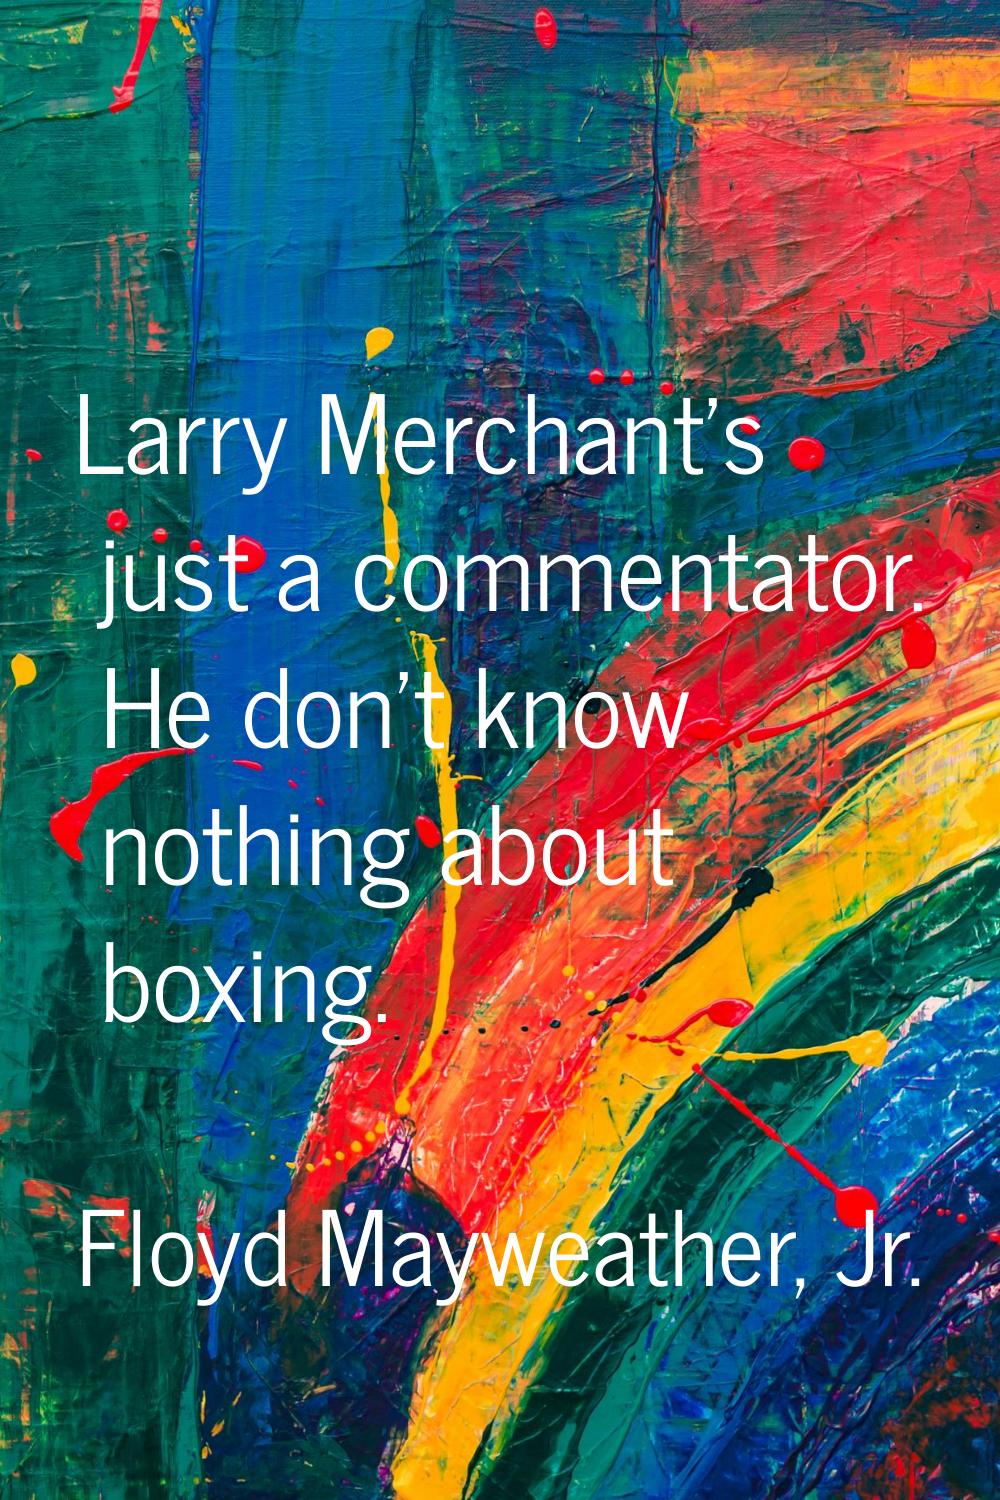 Larry Merchant's just a commentator. He don't know nothing about boxing.